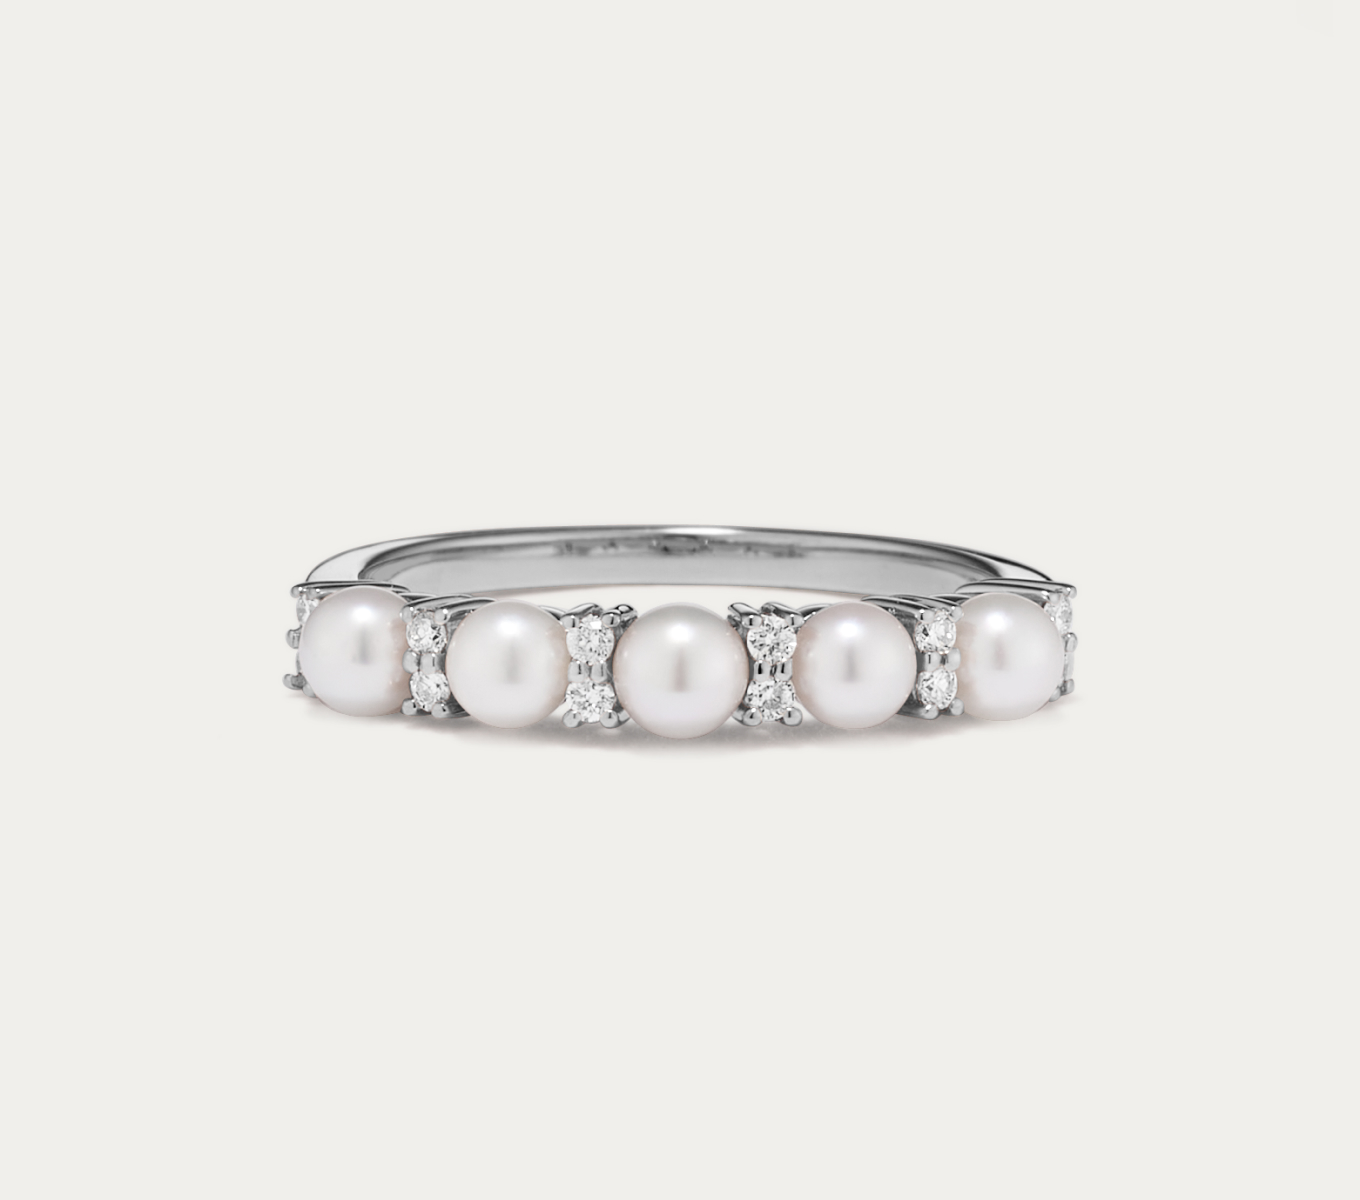 Annecy 3mm Cultured Akoya Pearl and Diamond Ring